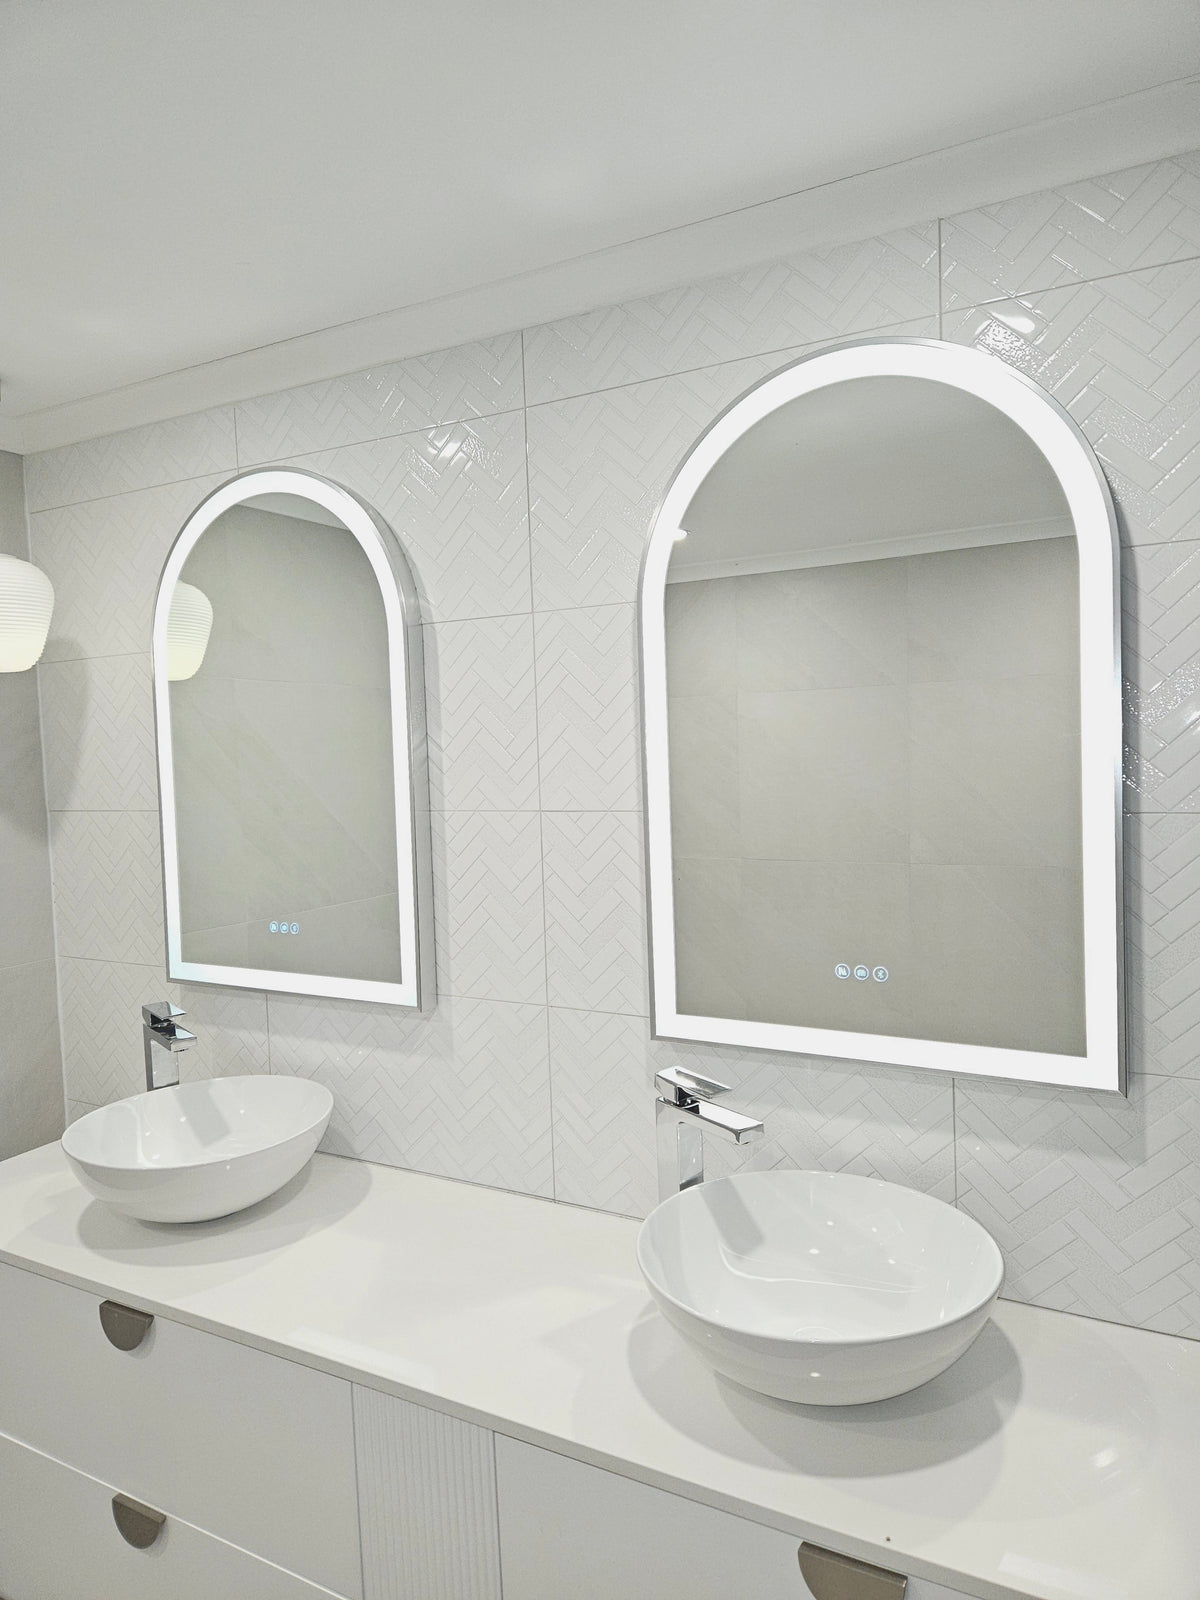 Elegant duo of Arch-shaped Smart LED Mirrors in minimalist white-on-white bathroom.